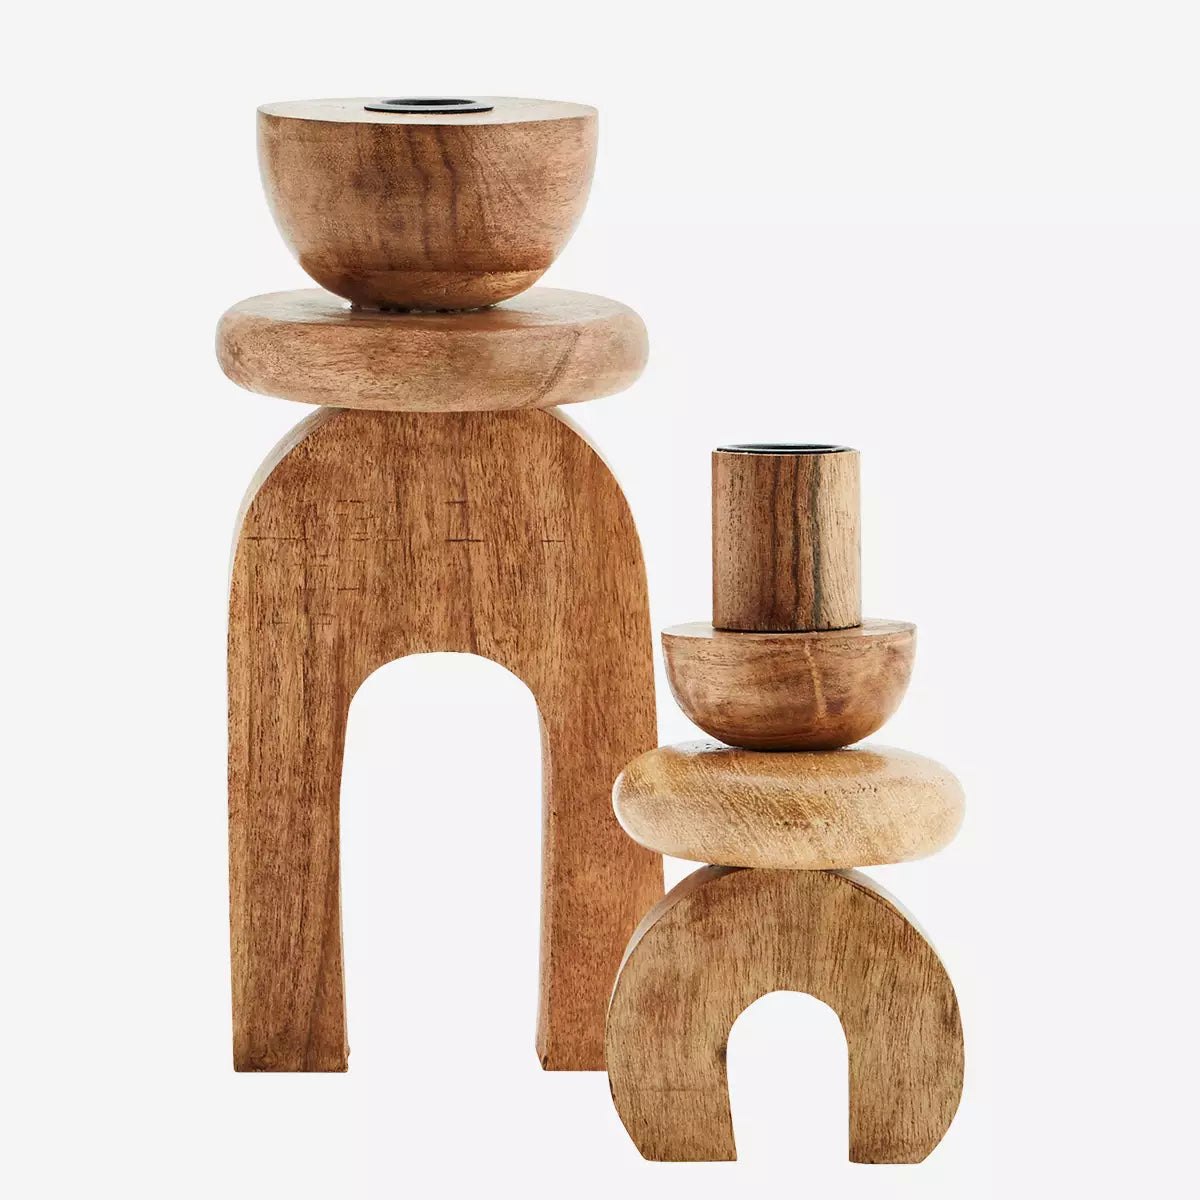 Wooden Candle Holders Set Of 2